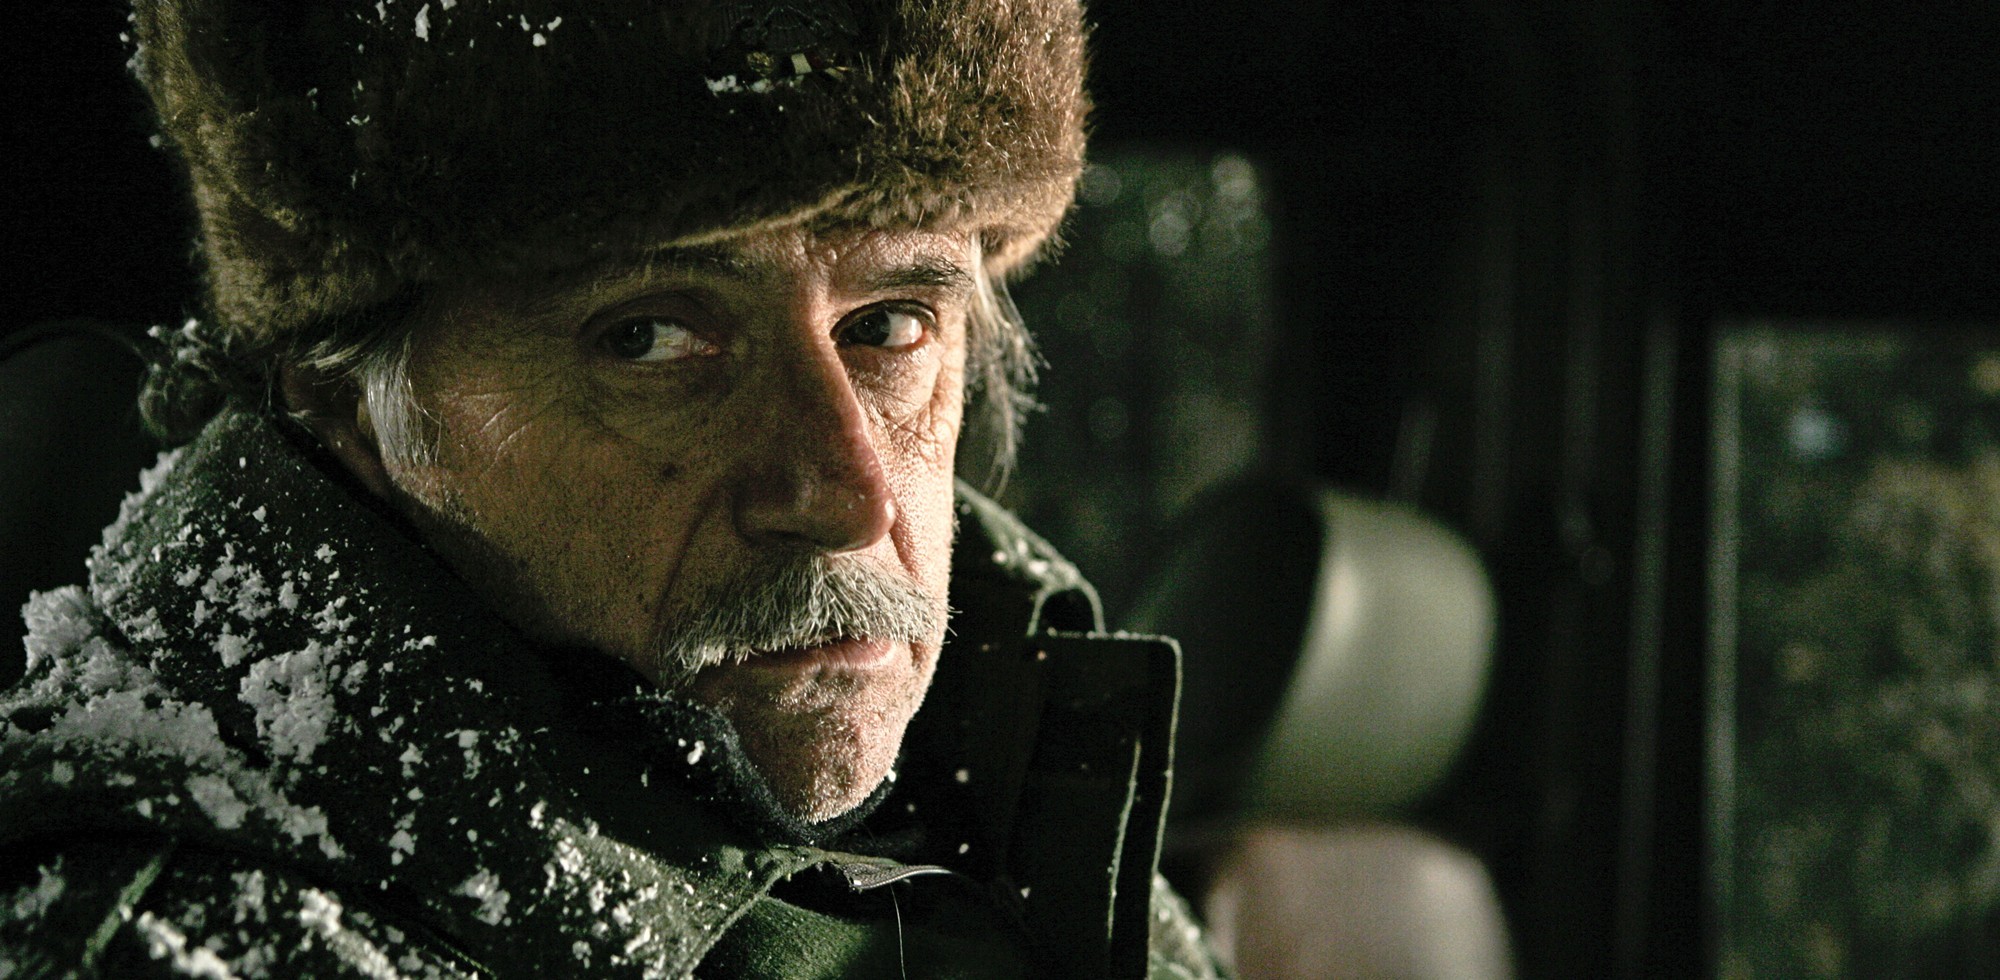 Rade Serbedzija stars as Nebojsa in In the Land of Blood and Honey (2011). Photo credit by Dean Semler.